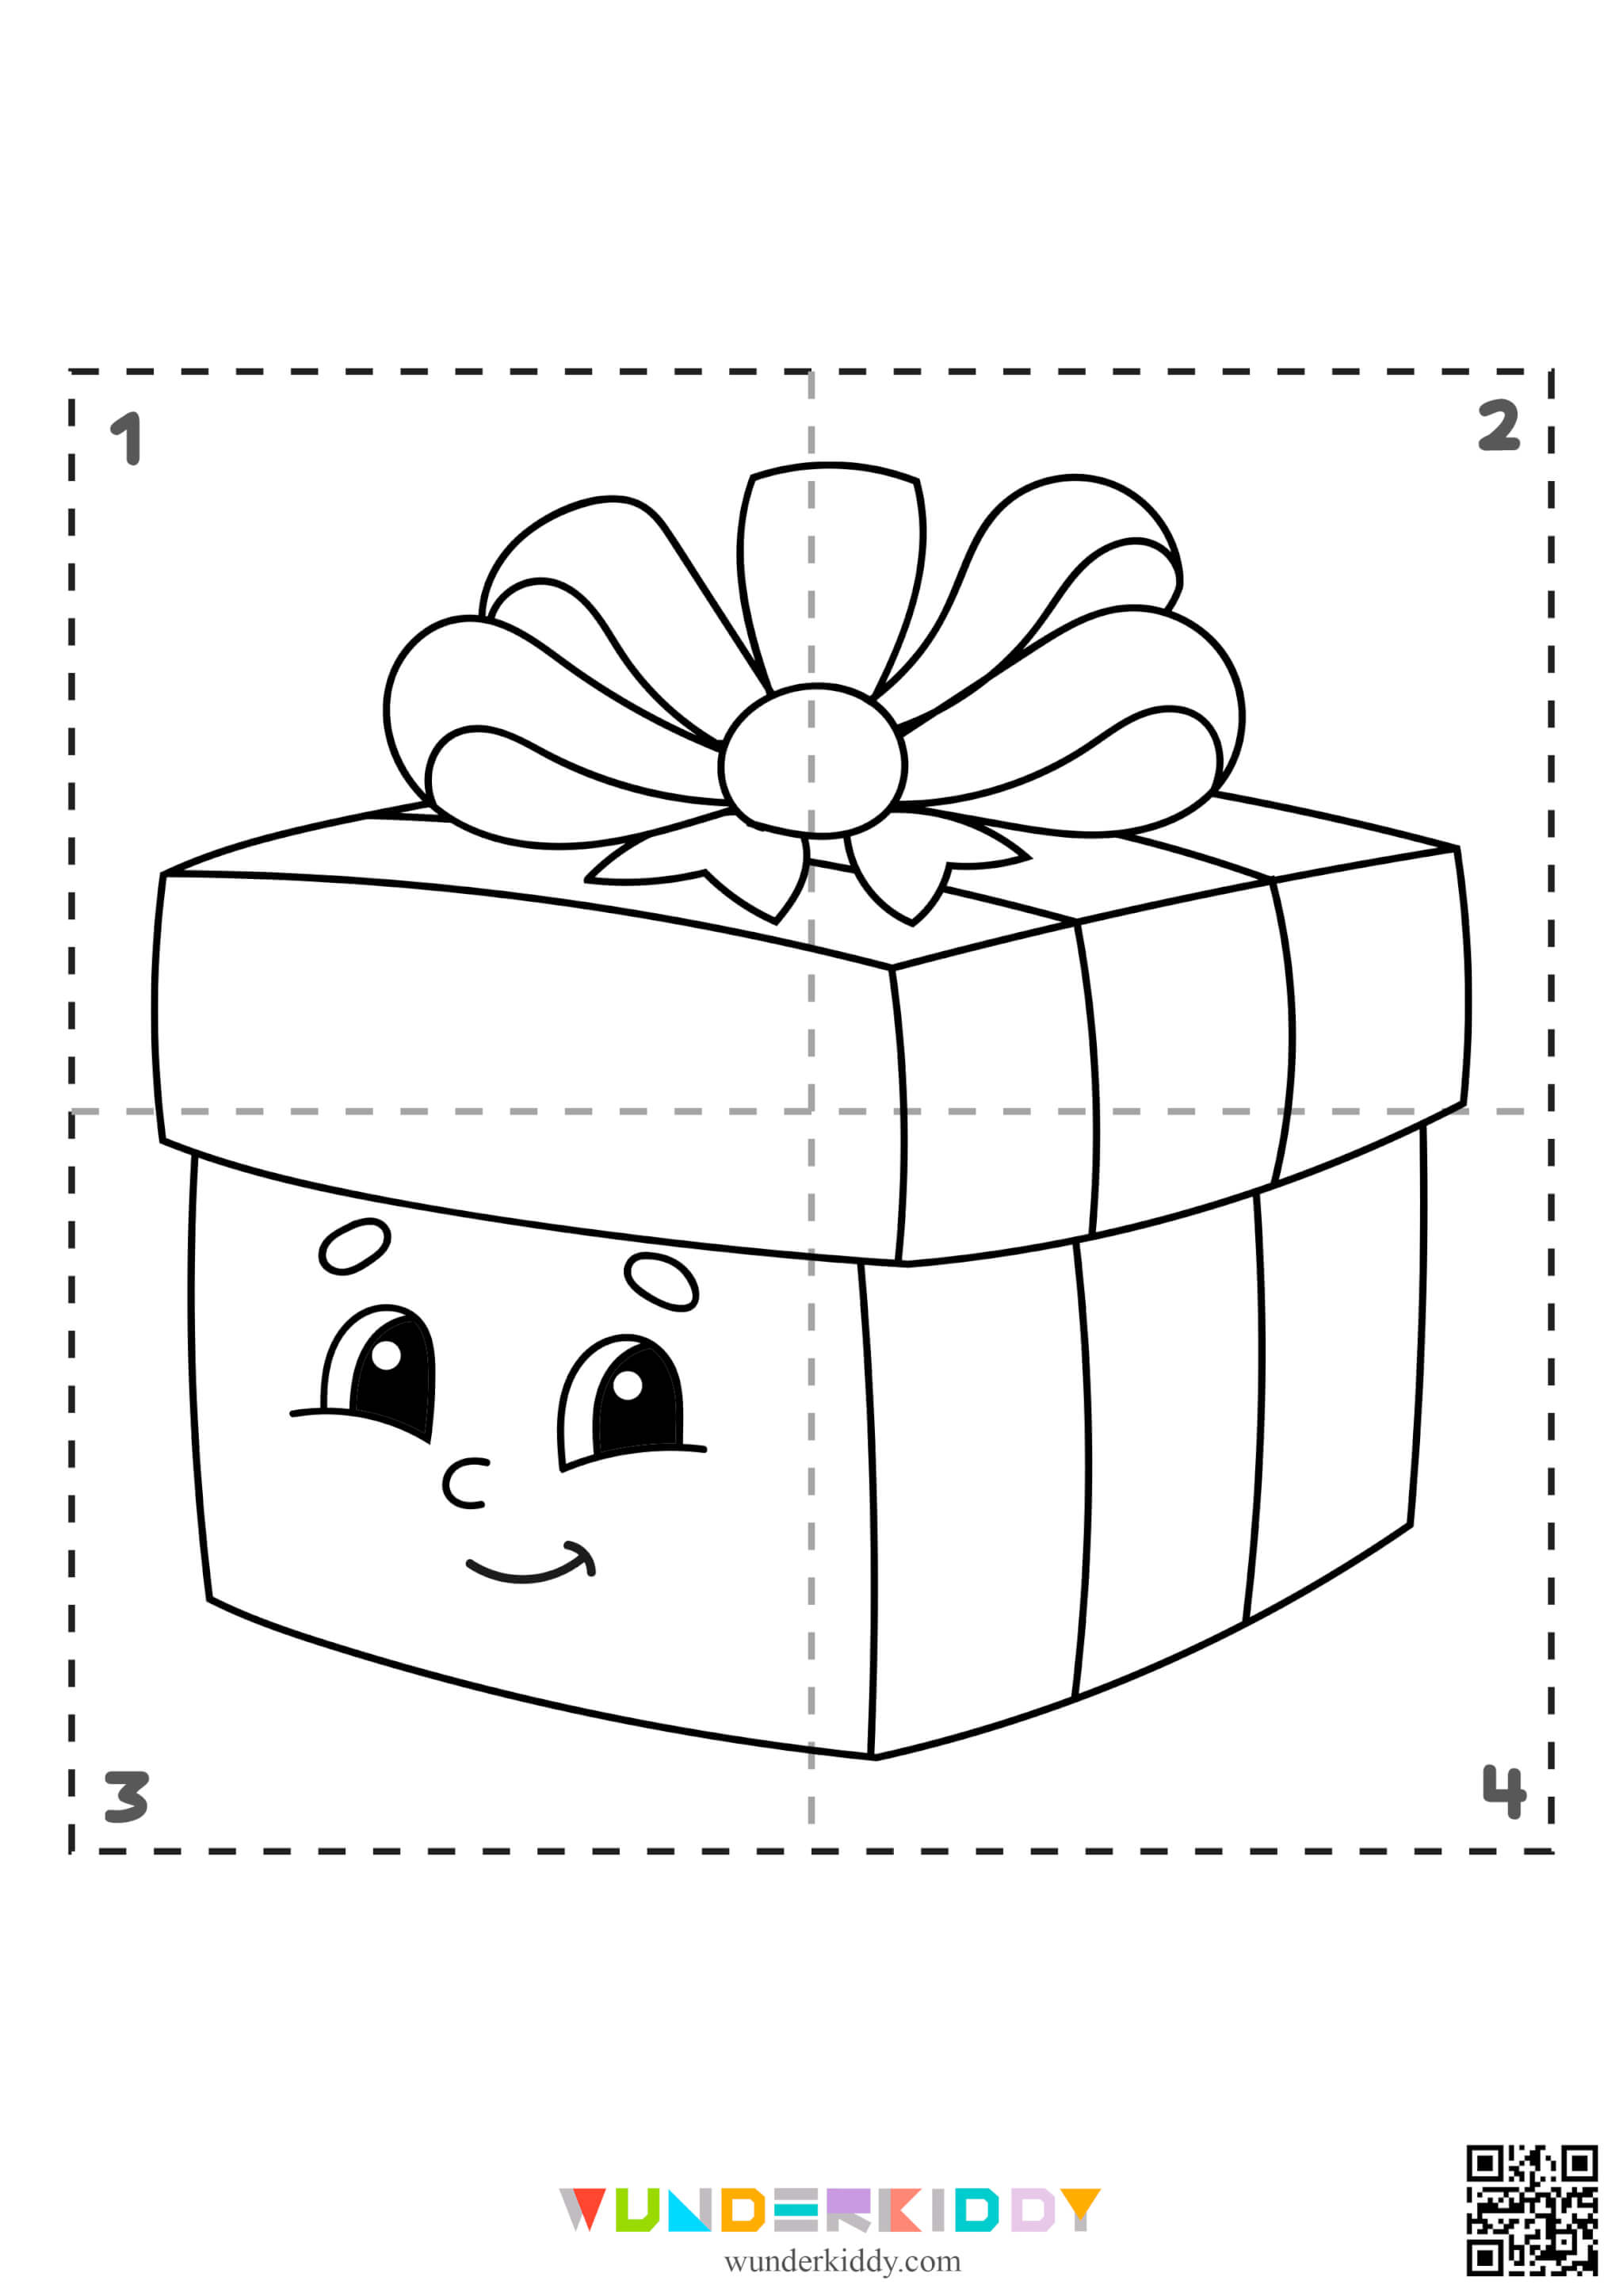 Coloring pages «New Year's Puzzle» - Image 5